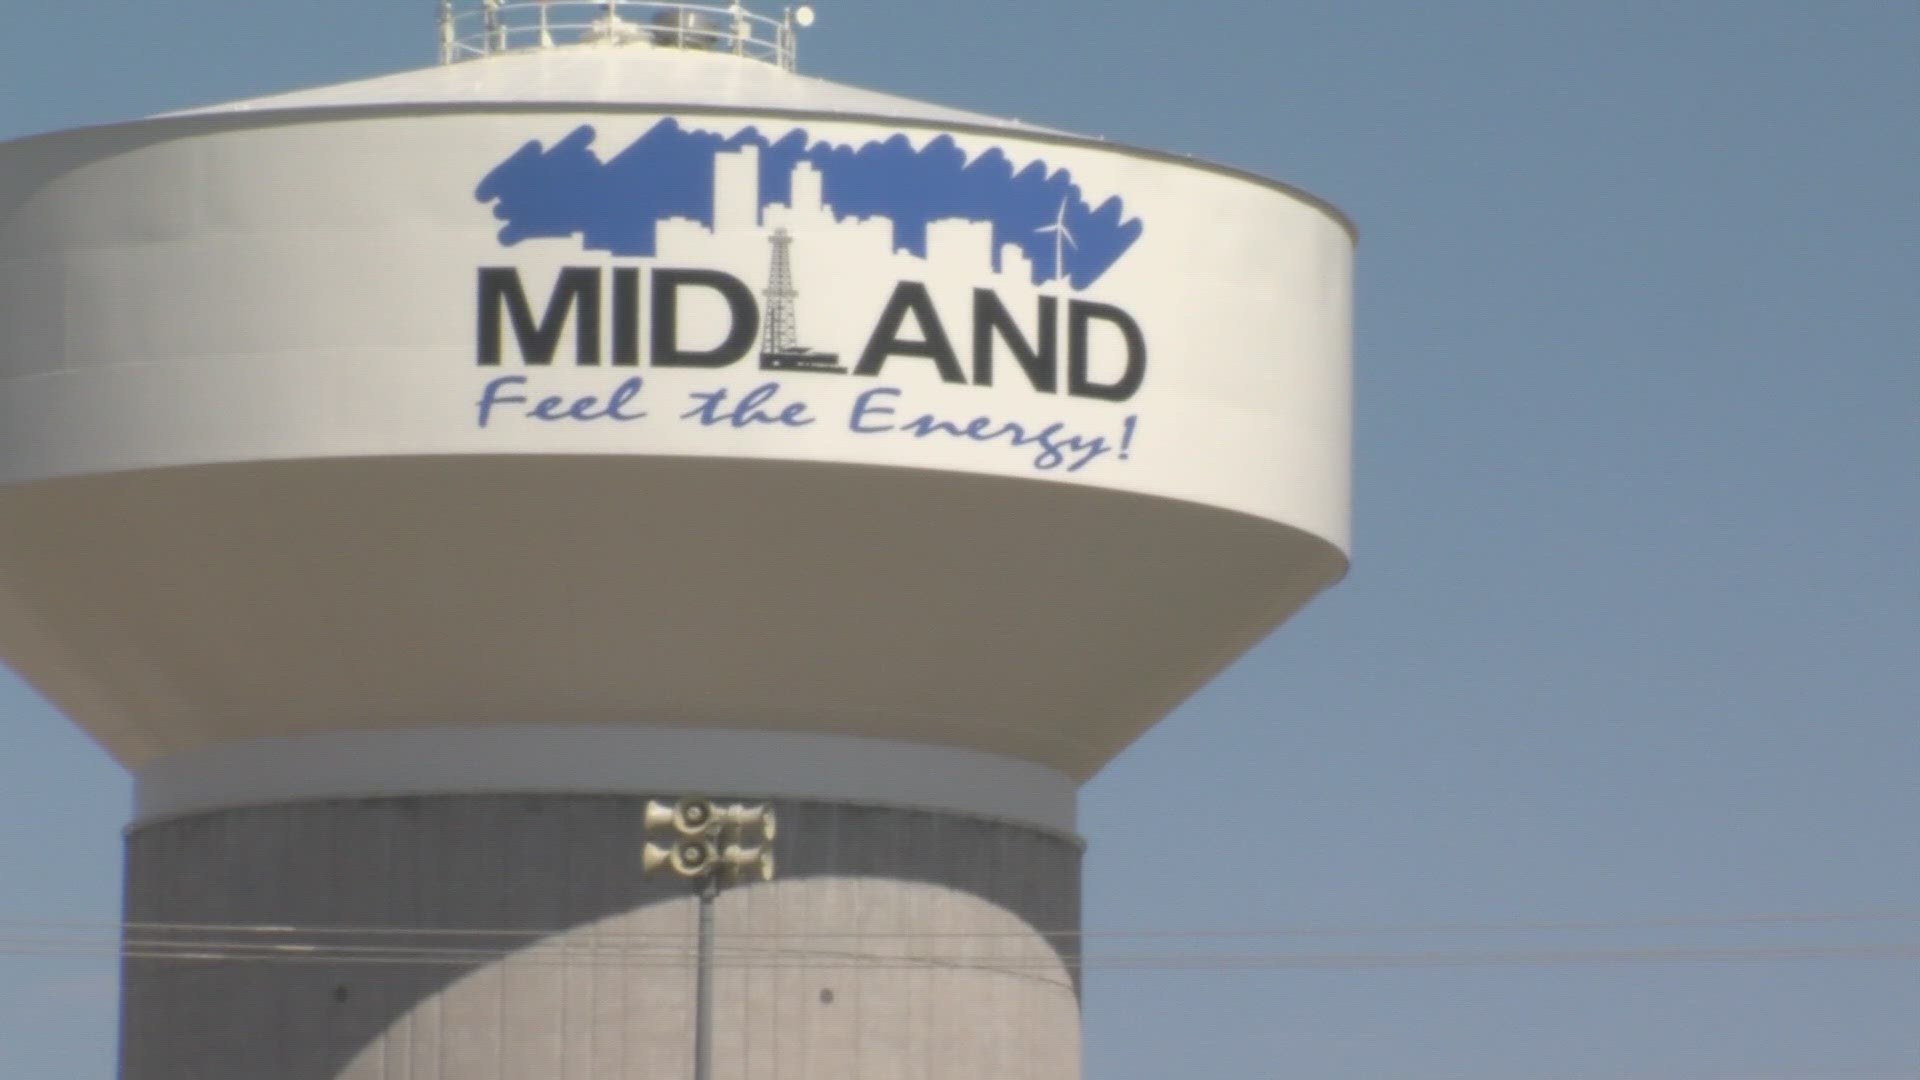 The city has maintained stage 1 restrictions for several years to preserve water. Midland's groundwater is a strong backup, and another water source is in the works.